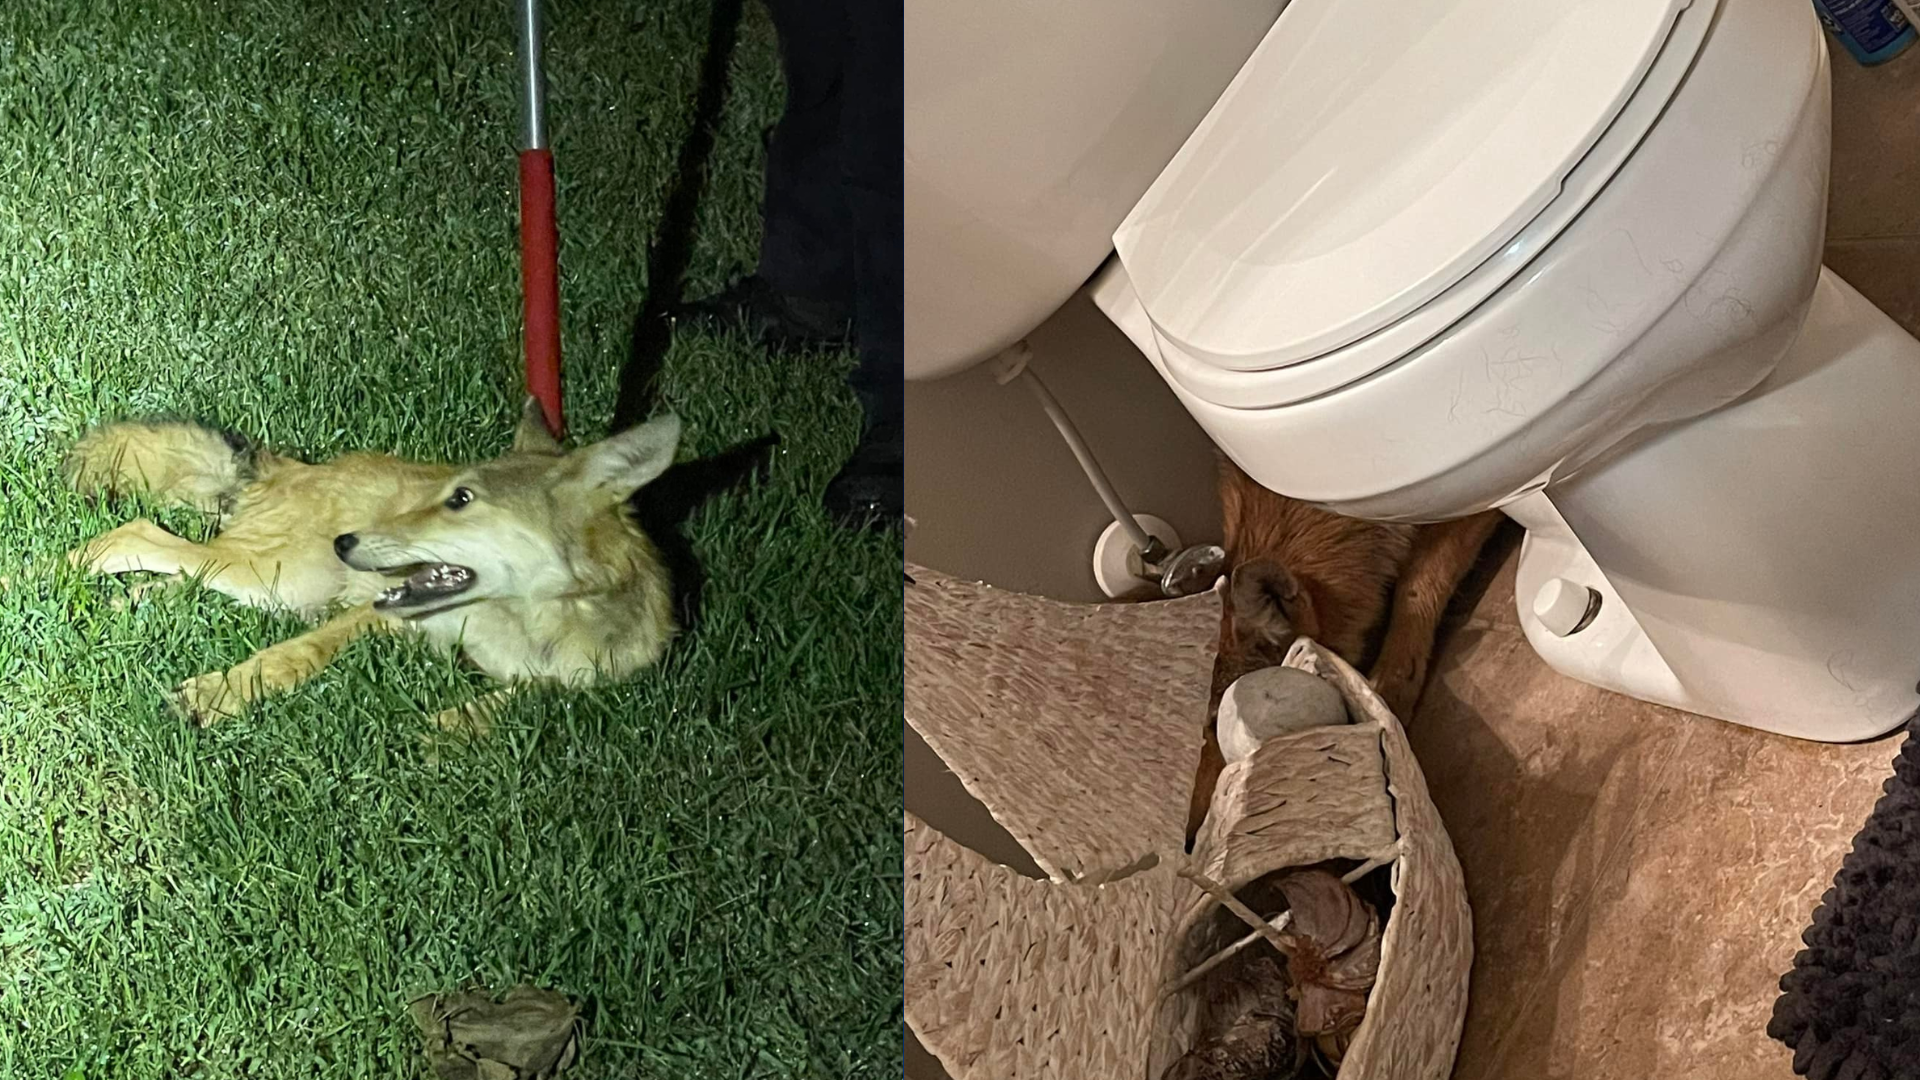 Family calls police after finding coyote hiding in their bathroom